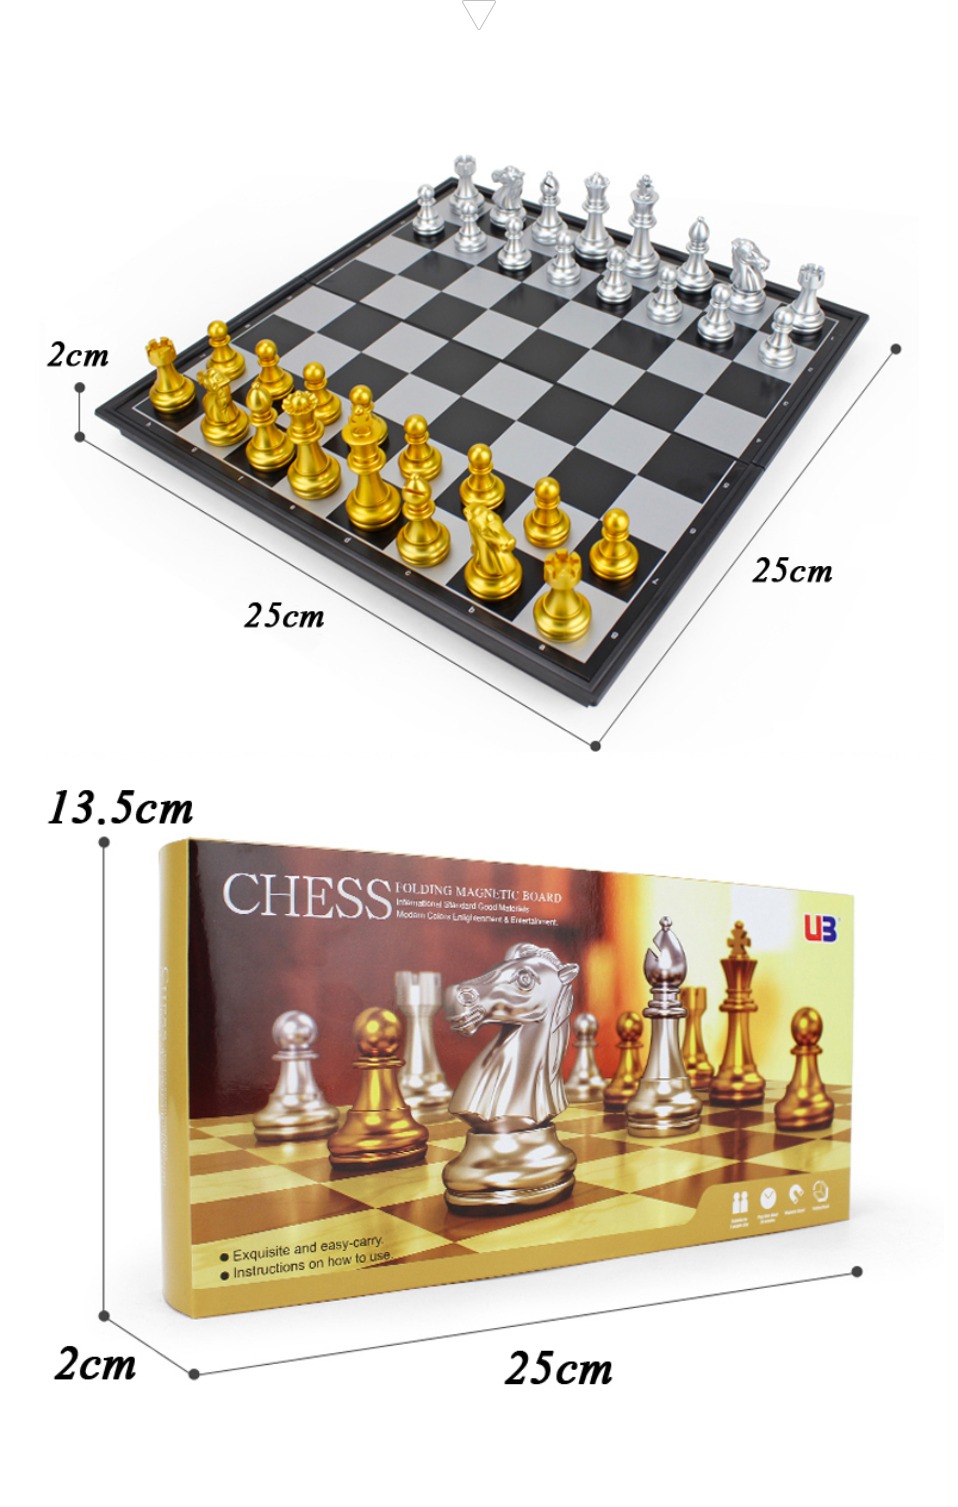 32PCS-Medieval-Chess-Set-With-High-Quality-Chessboard-Gold-Silver-Chess-Pieces-Magnetic-Board-Game-C-1841255-2